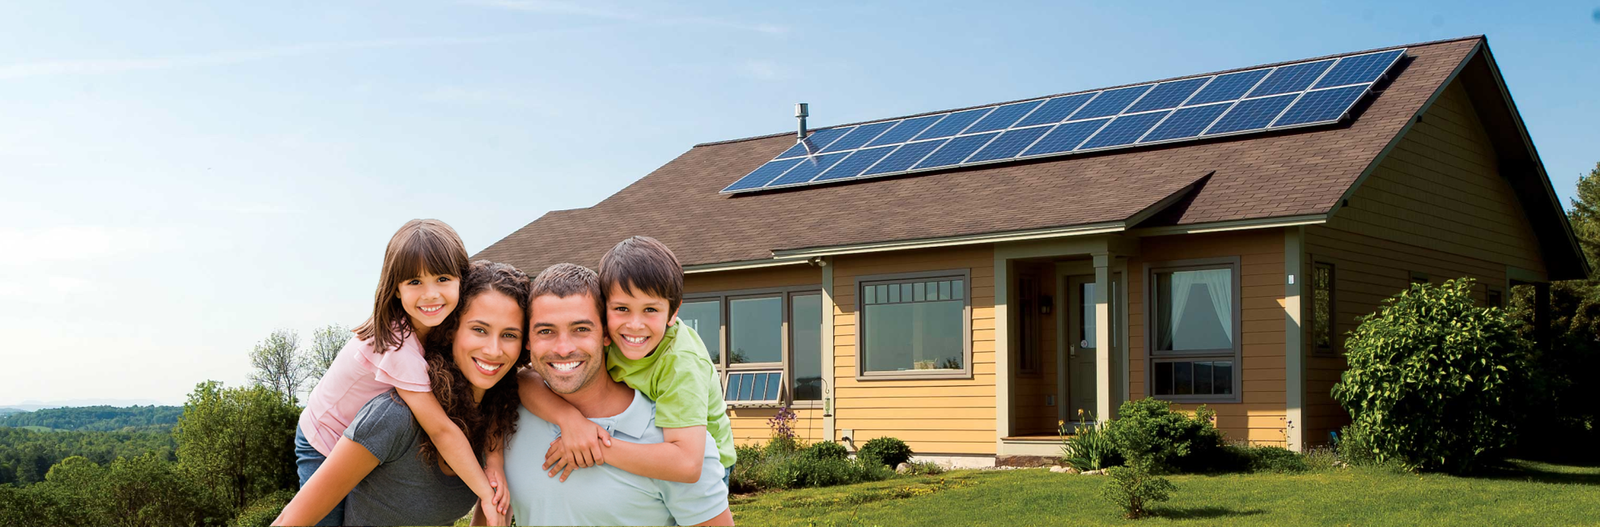 Going Solar A Comprehensive Guide to Residential Solar System Type